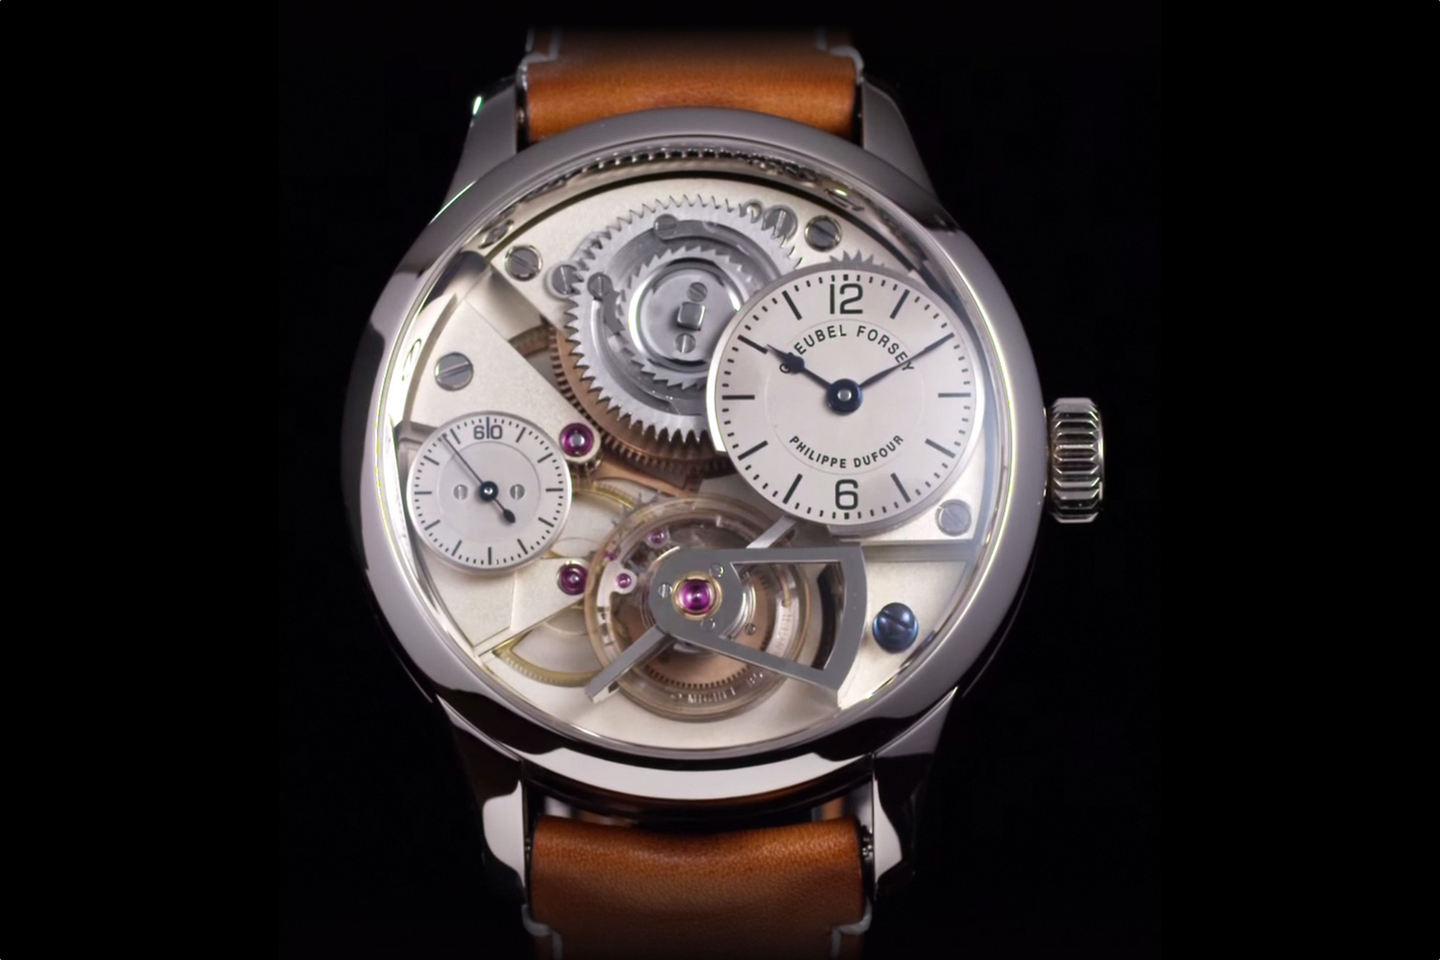 Le Garde Temps prototype timepiece actually sells for $1.46 million